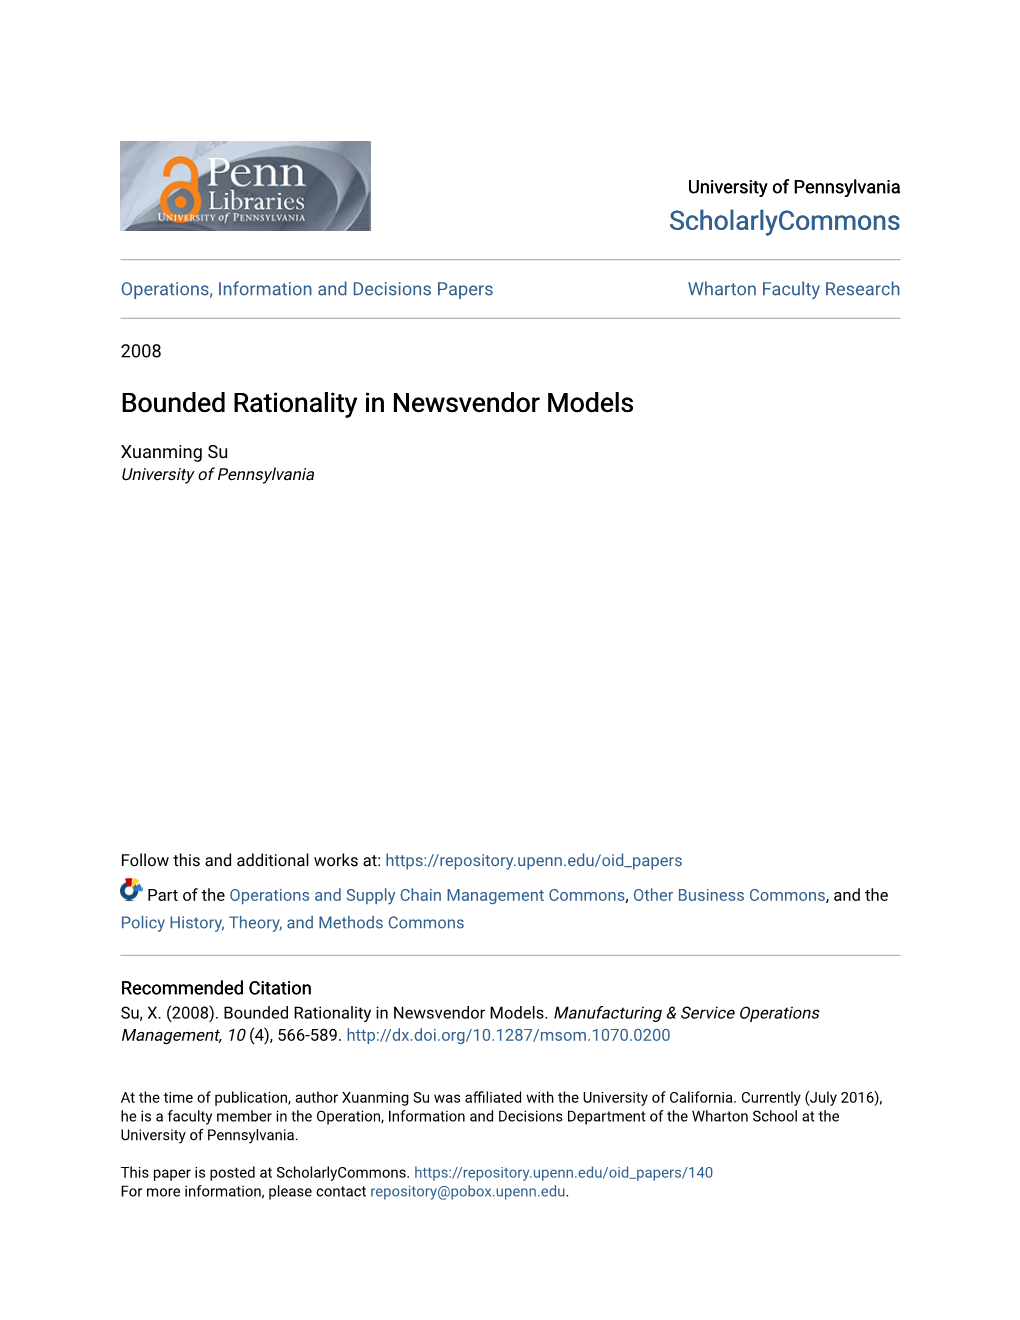 Bounded Rationality in Newsvendor Models